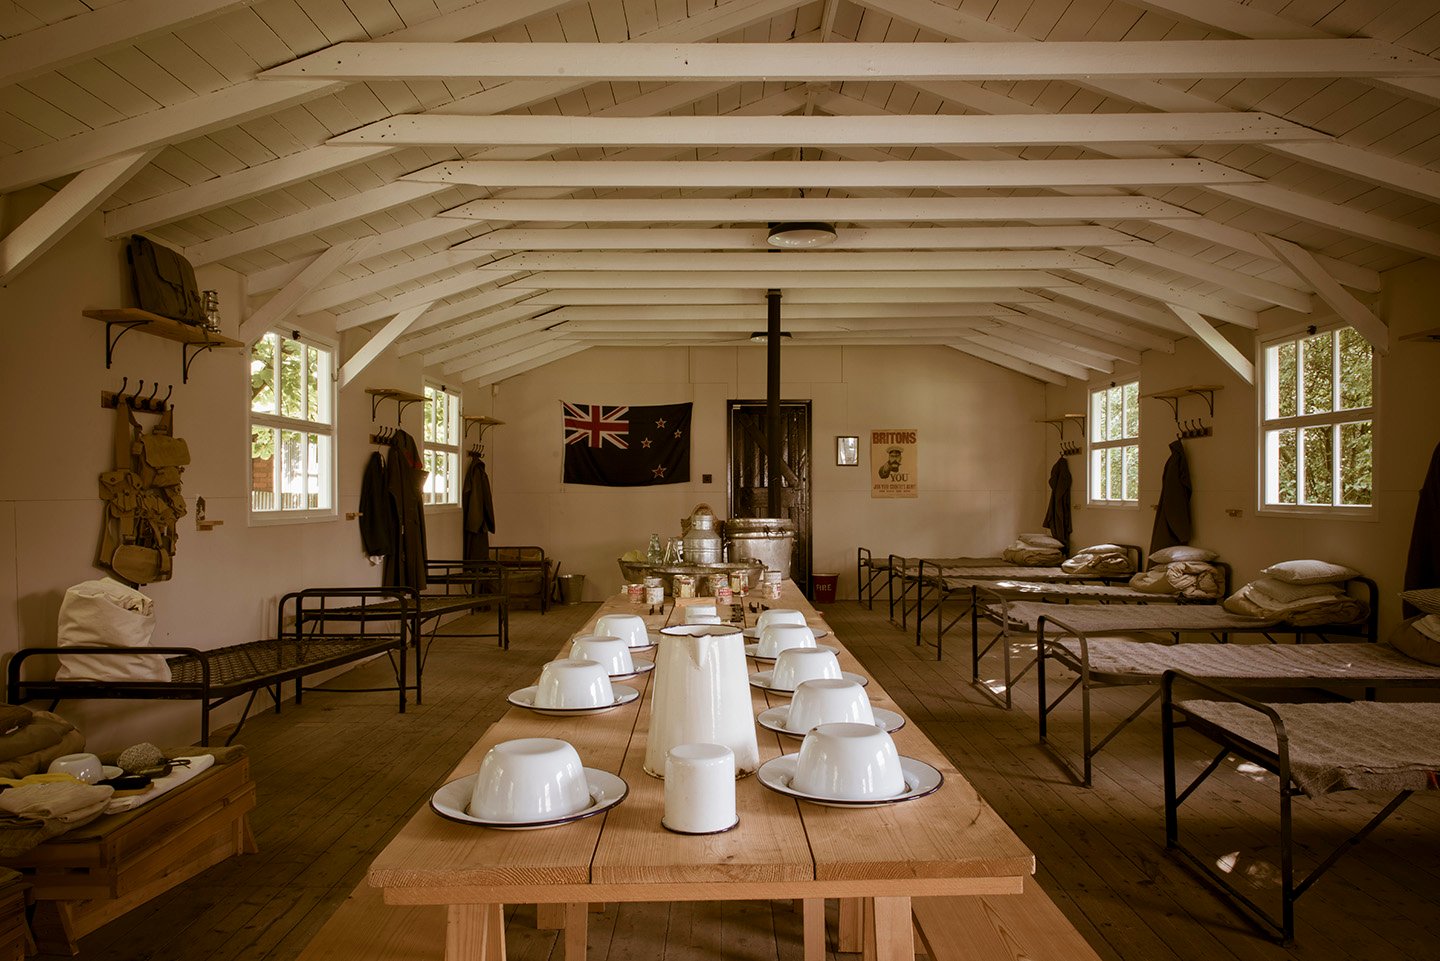 Colour photograph showing interior of wooden hut with trestle tables in centre and beds around sides